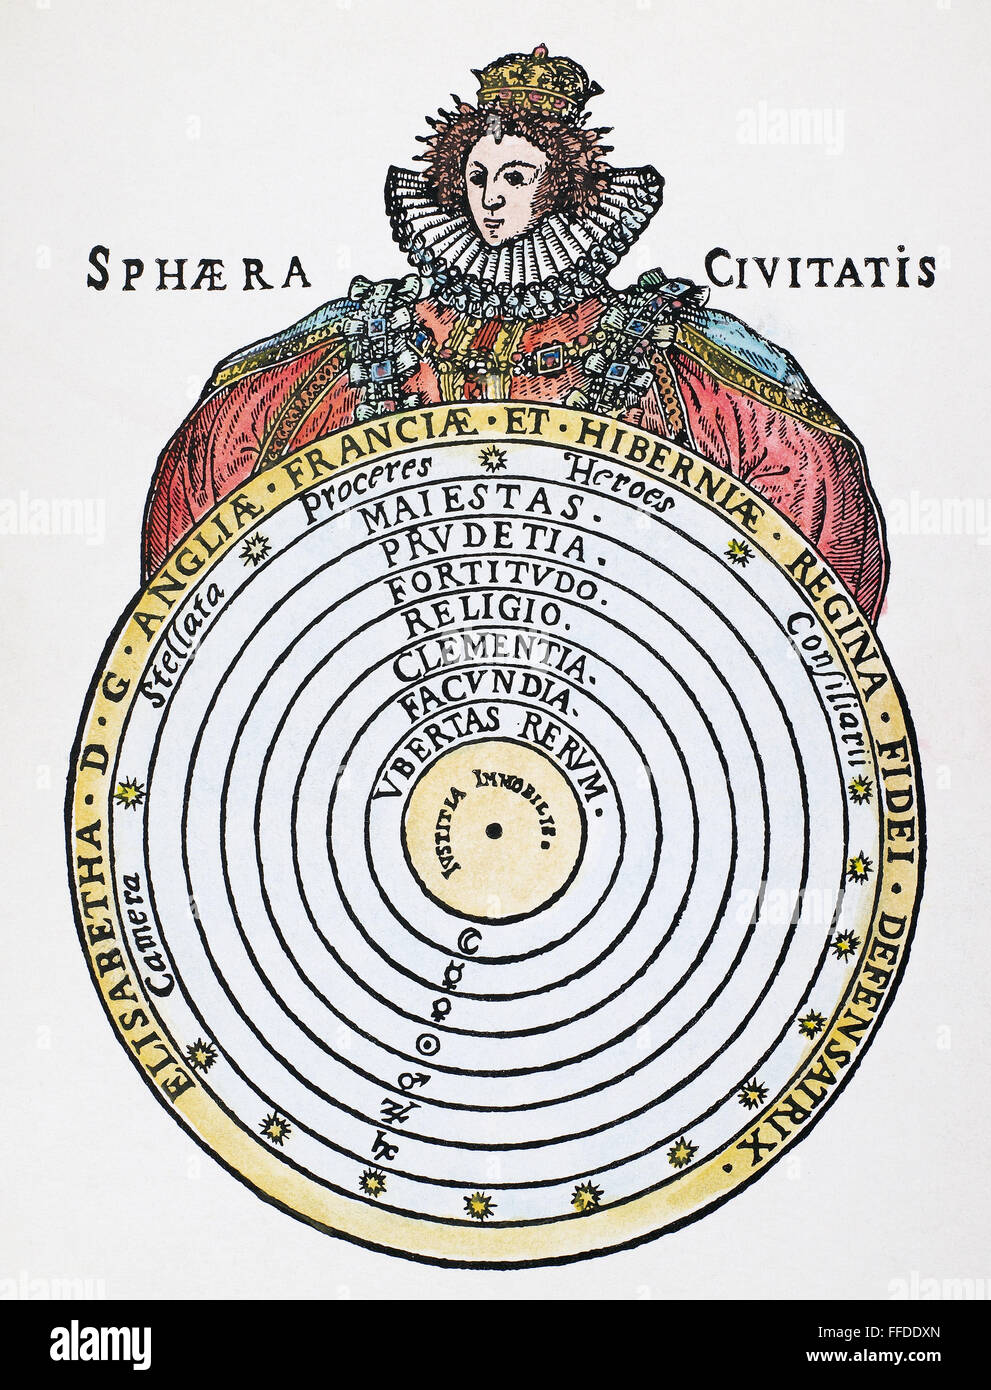 ELIZABETH I (1533-1603). /nQueen of England and Ireland, 1558-1603. Elizabeth depicted with an astrological diagram of the heavens, with 'immovable justice' placed at the center. Woodcut from John Case's 'Sphaera Civitatis,' Oxford, 1588. Stock Photo